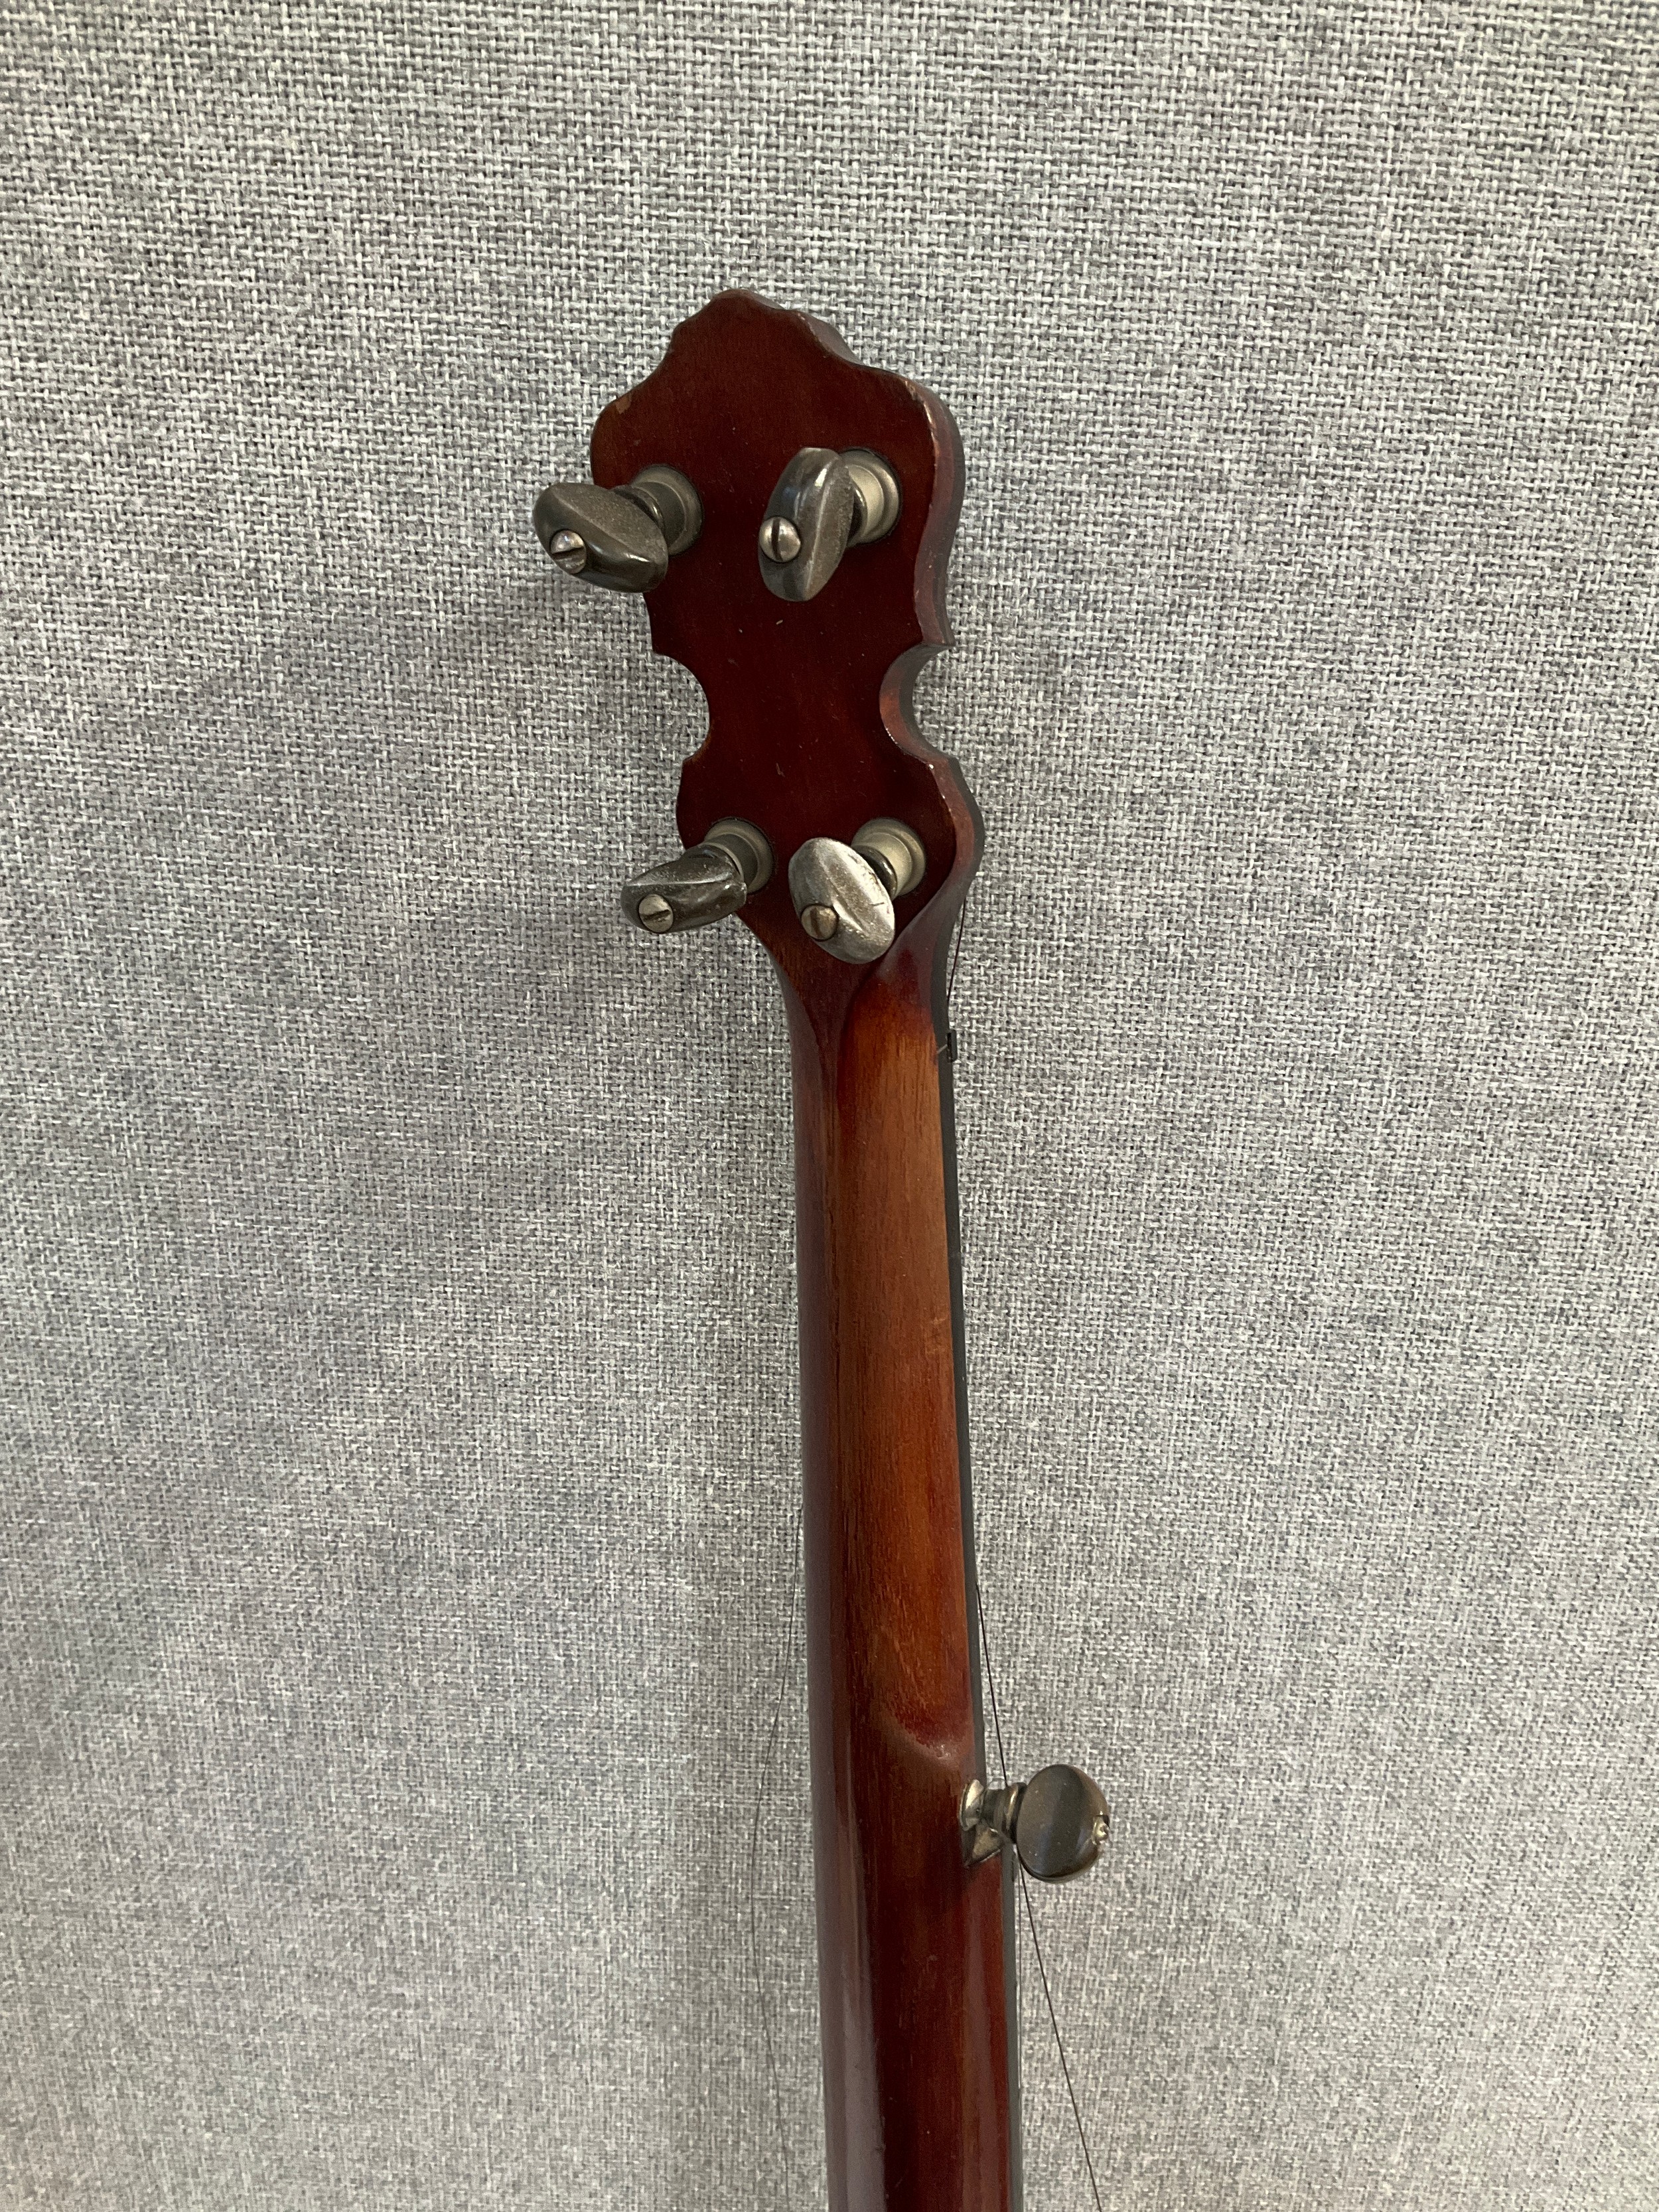 A Clifford Essex Co. Of Bond Street, London banjo circa 1910-20, open back with mother of pearl - Image 4 of 5